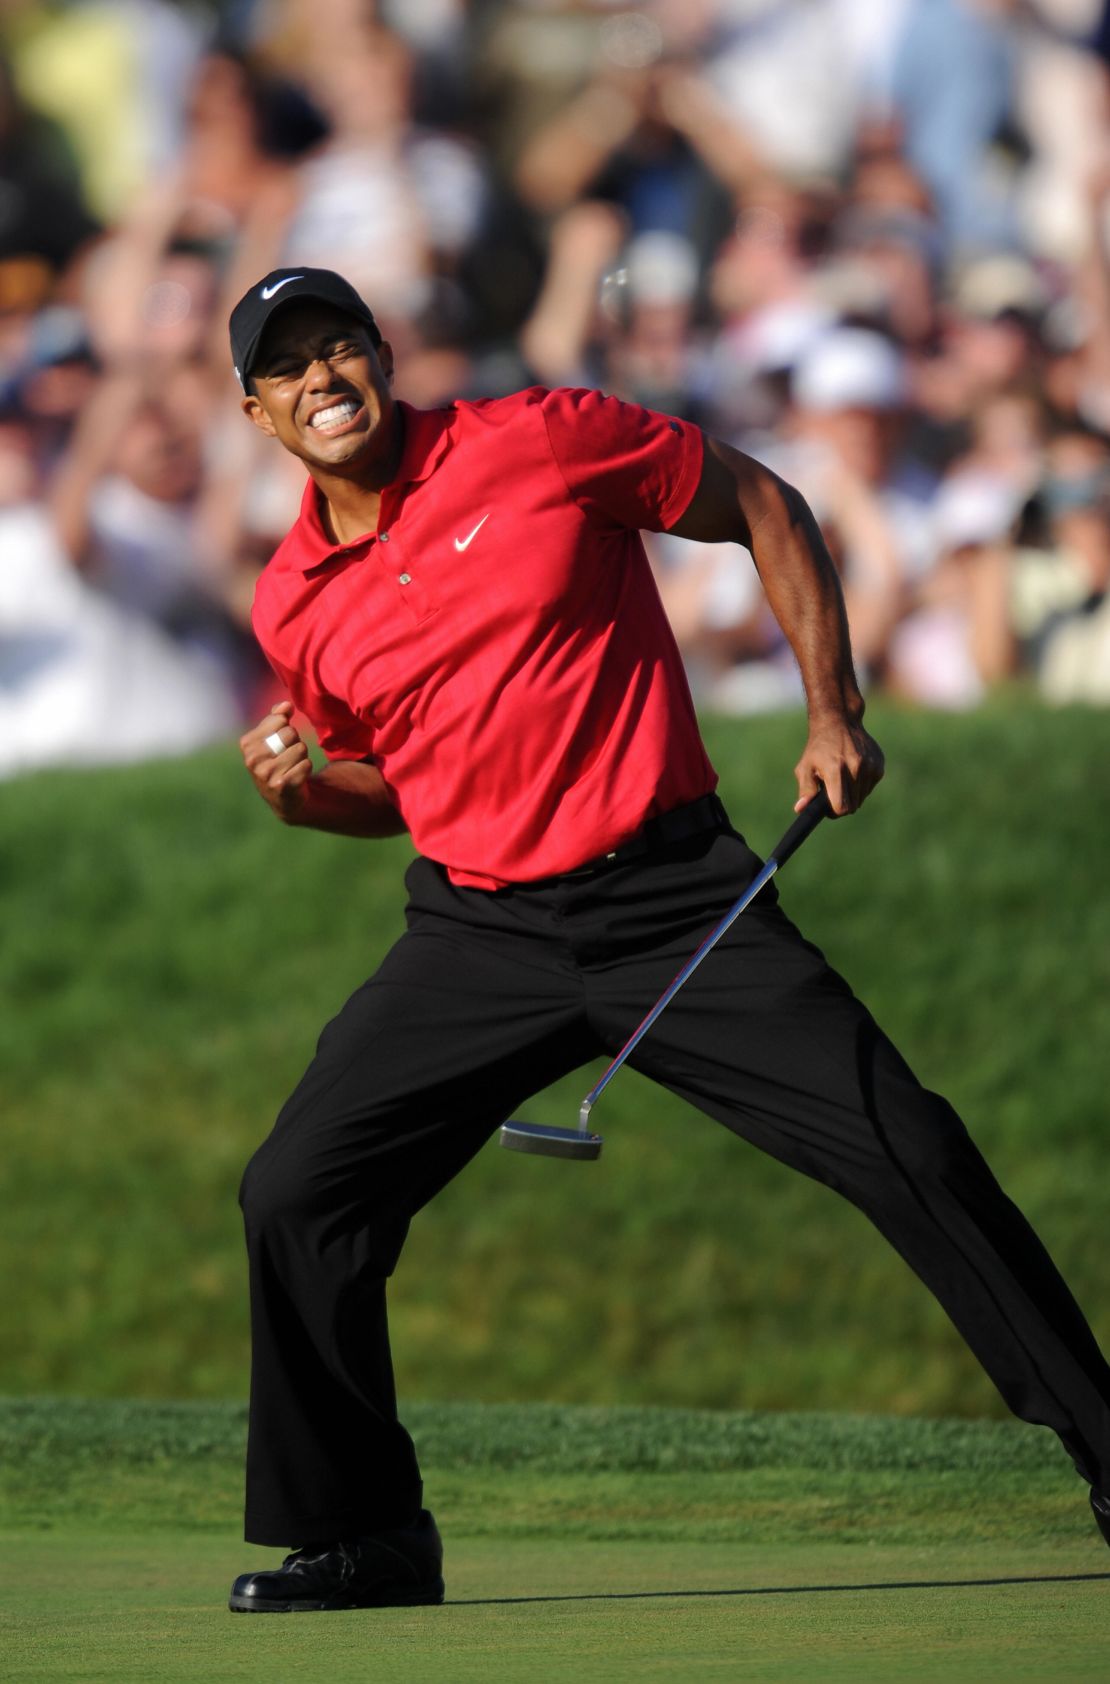 Tiger Woods defied injury to win a remarkable 2008 US Open in a playoff with Rocco Mediate.